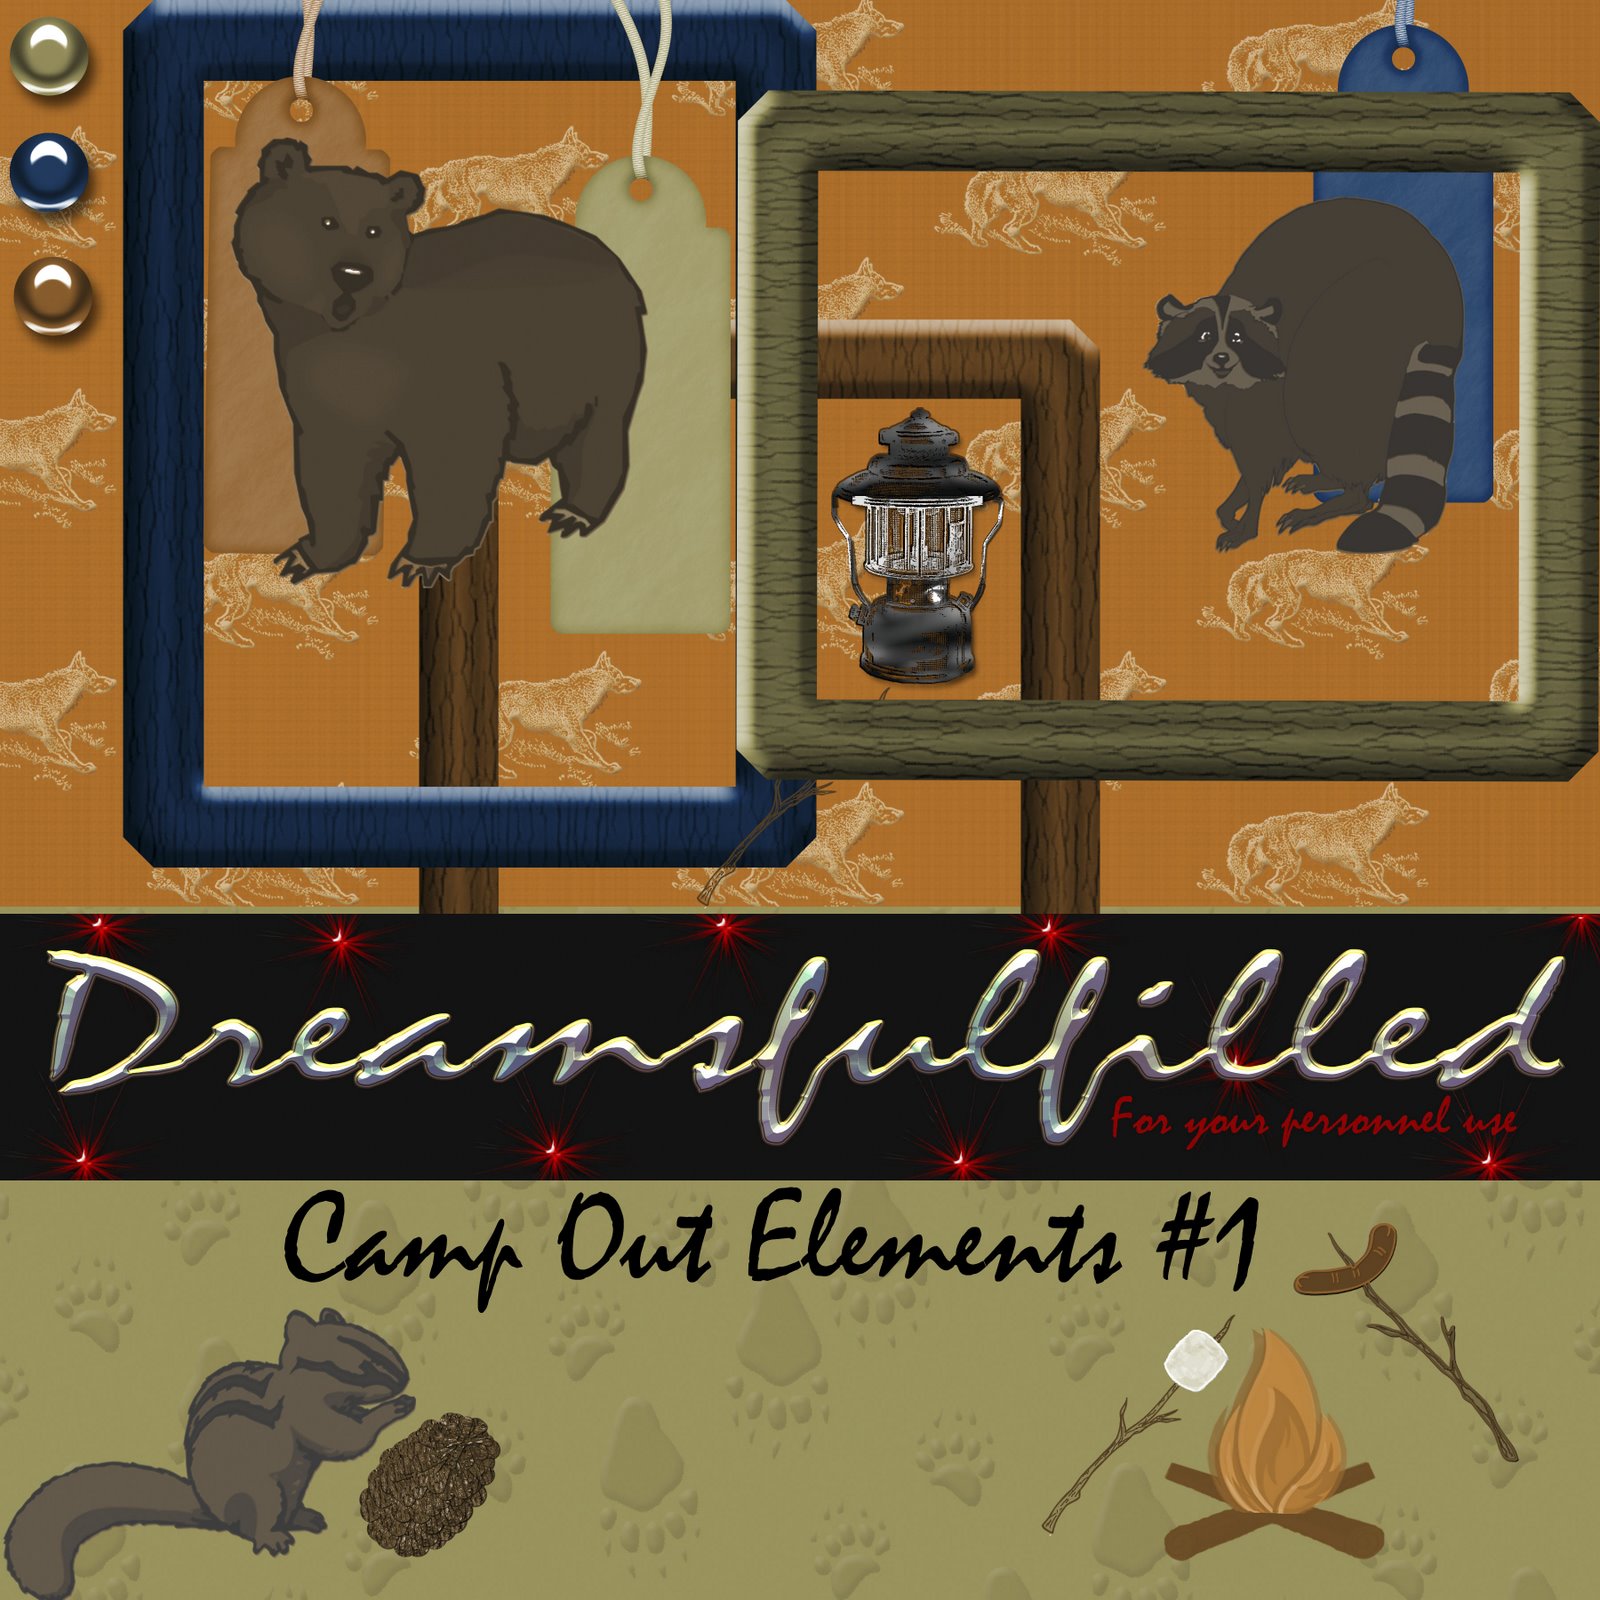 [Camp+Out+Elements+#1.jpg]